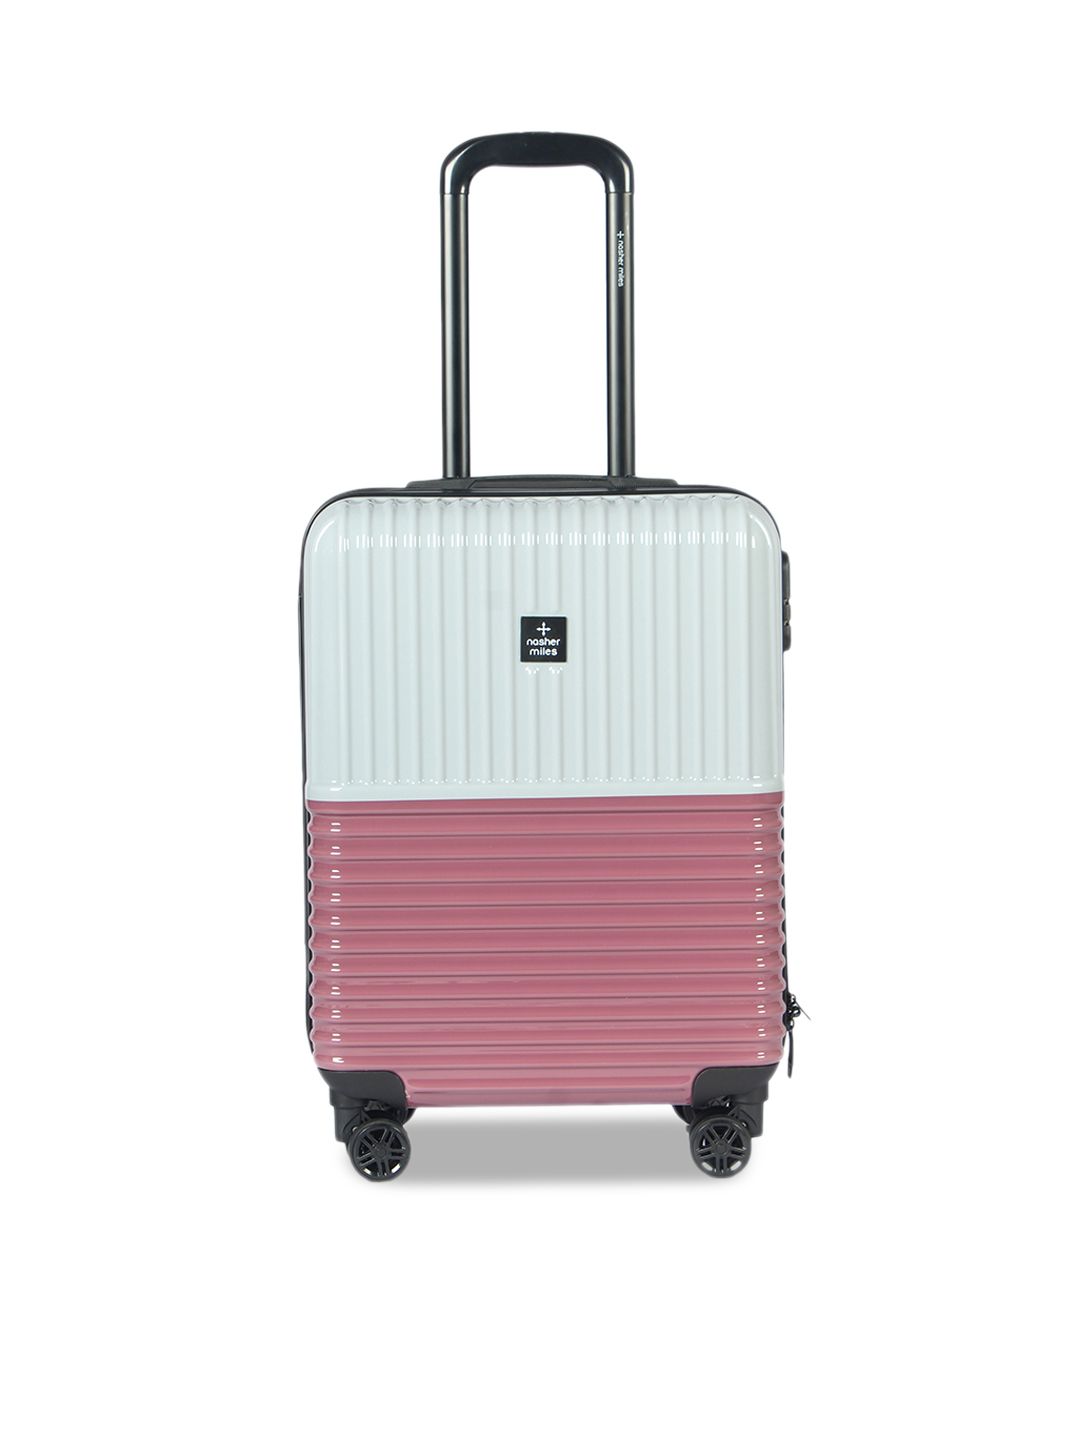 Nasher Miles Rose Gold-Toned & Silver-Toned Colourblocked Istanbul Hard-Sided Trolley Suitcase Price in India